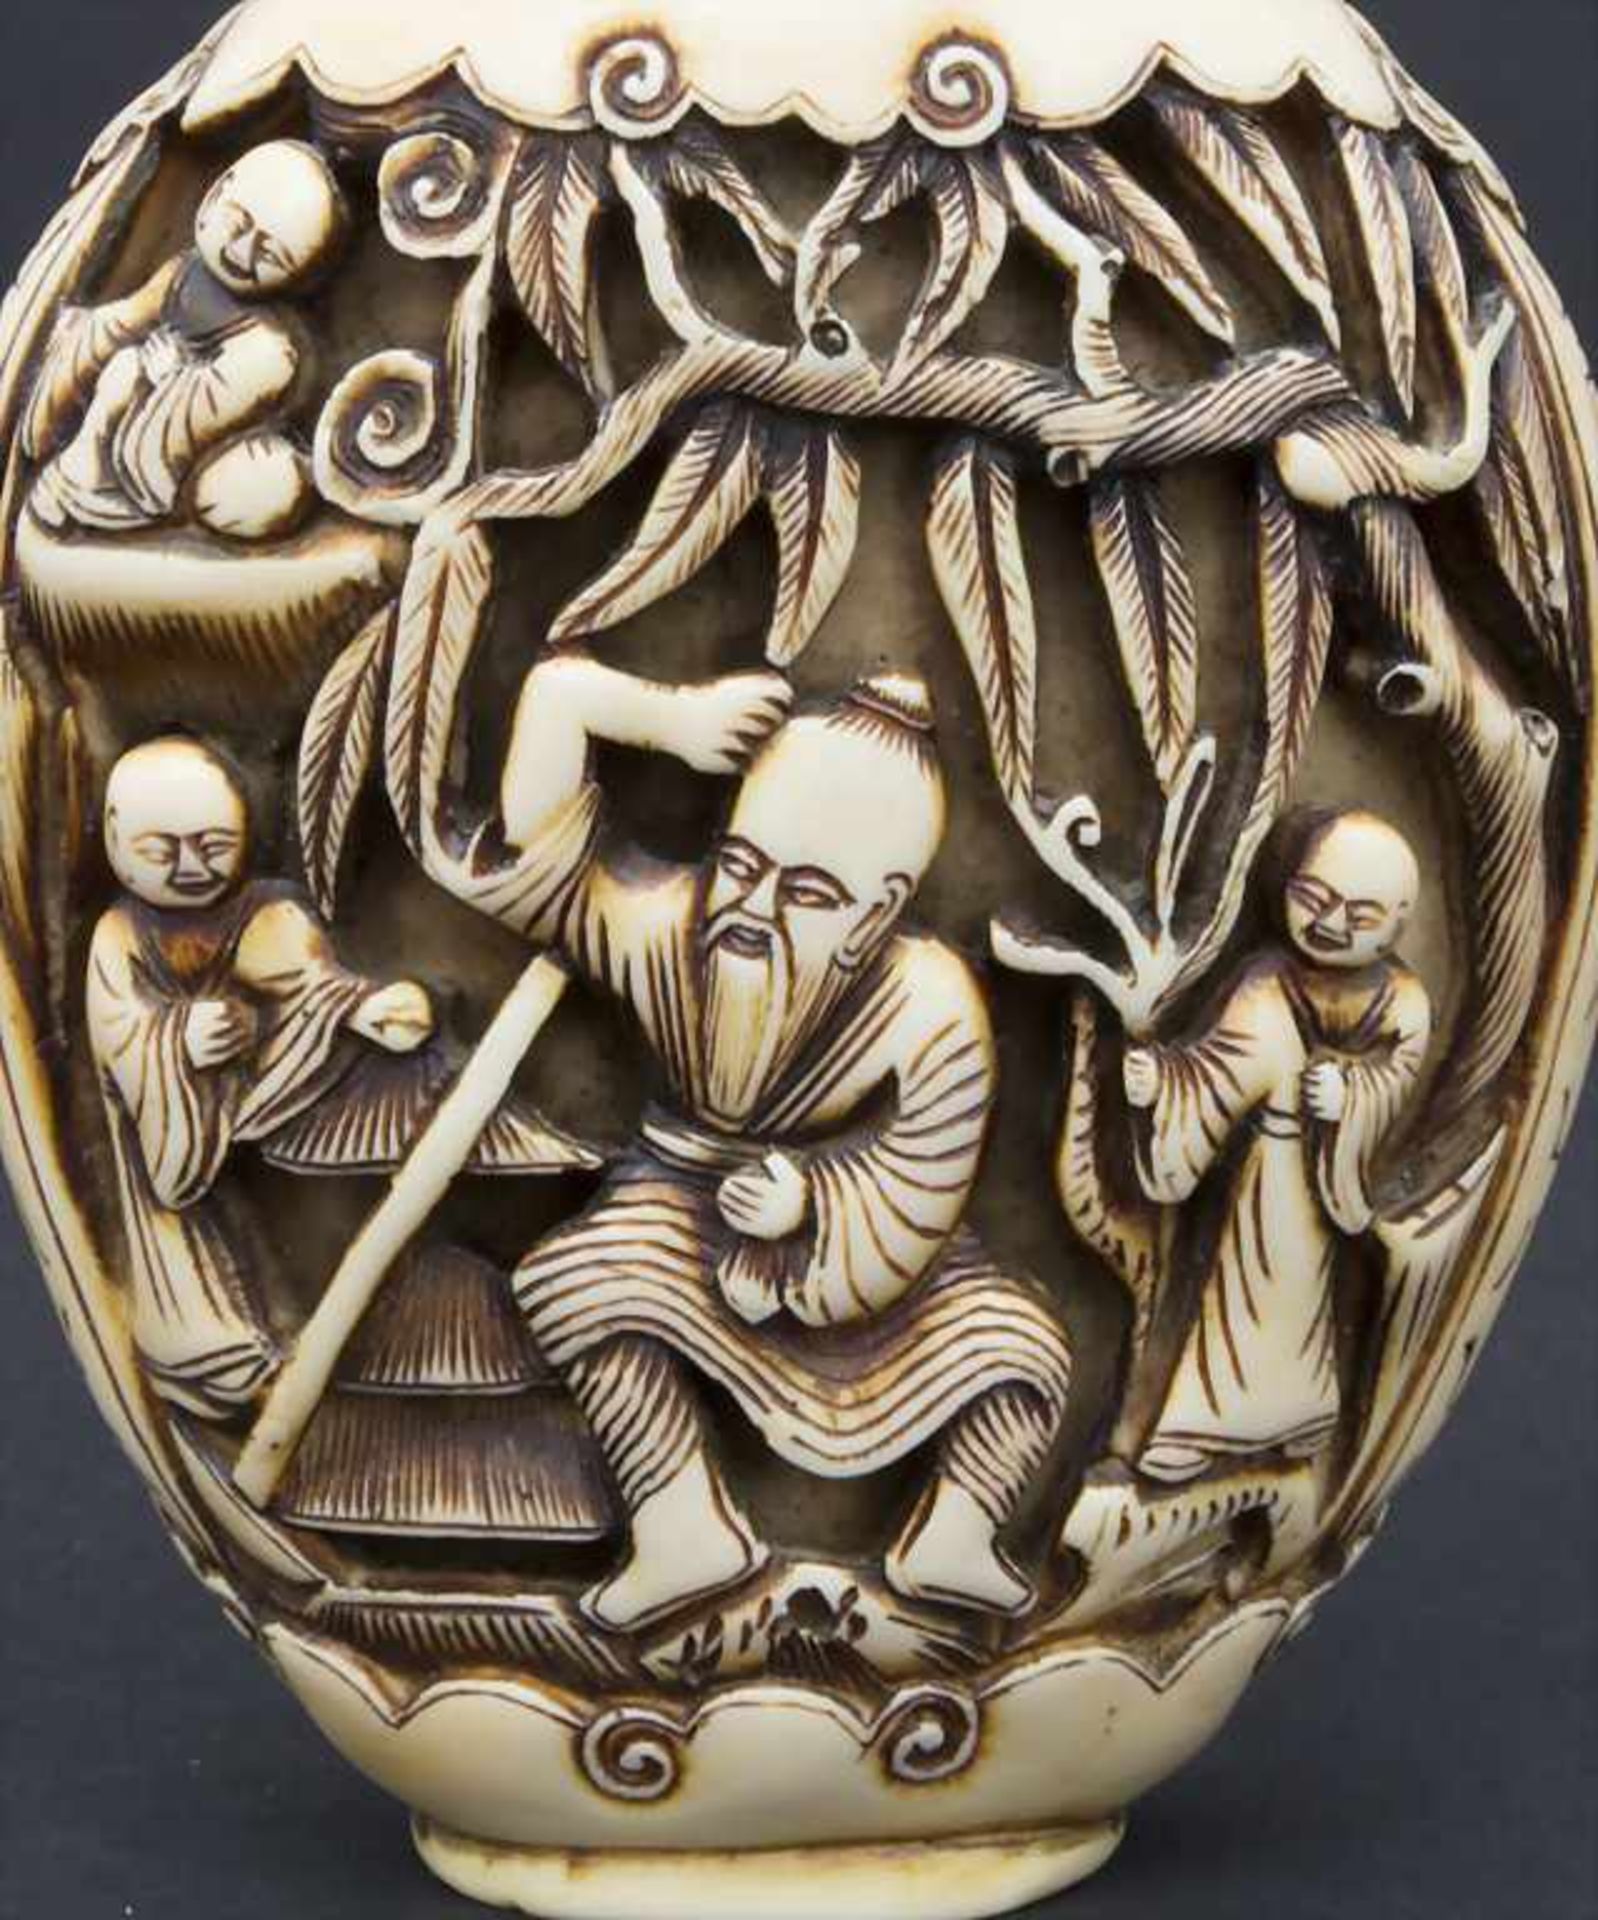 Snuffbottle mit Figurendekor / A snuff bottle with figural scenes, China, un 1900 - Image 7 of 7